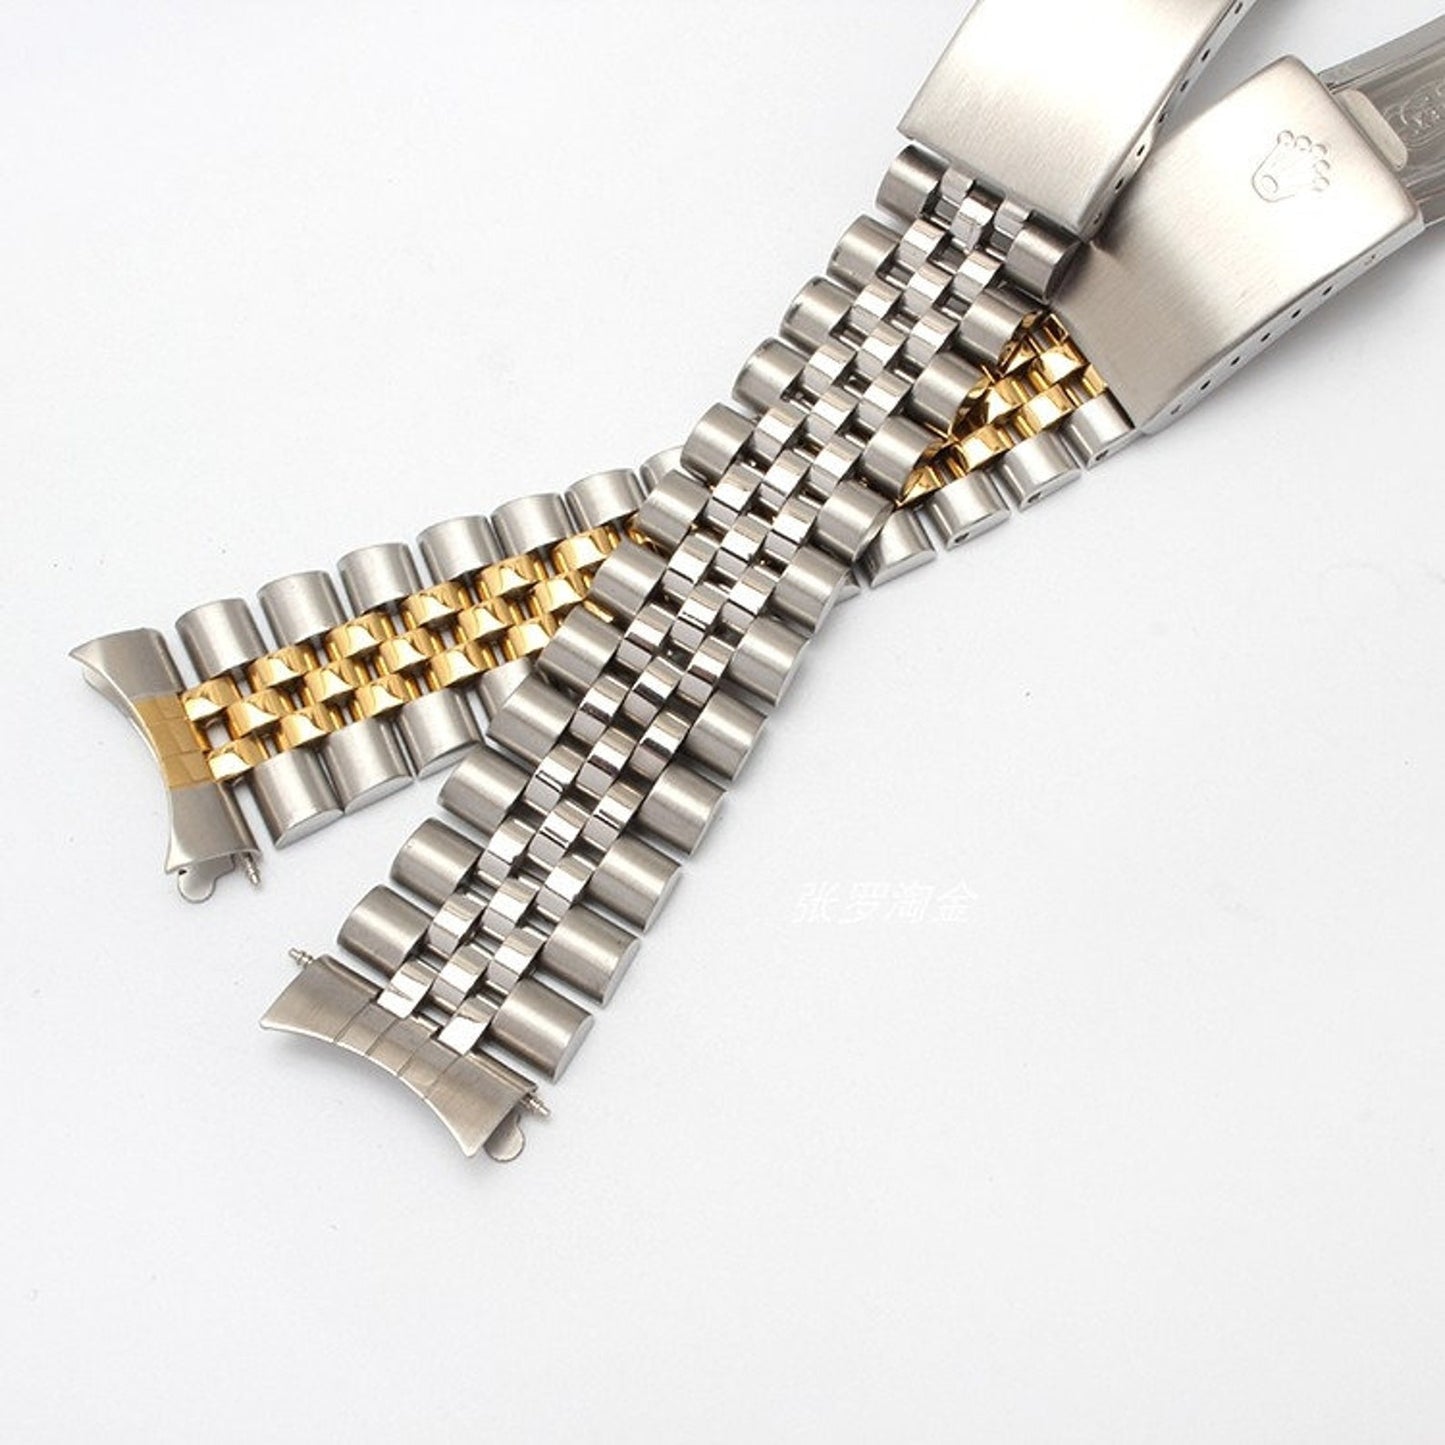 For Rolex 13mm, 17mm and 20mm Jubilee Steel Strap Bracelet Band SS Jubilee Oyster hollow end links jubilee bracelet for Rolex